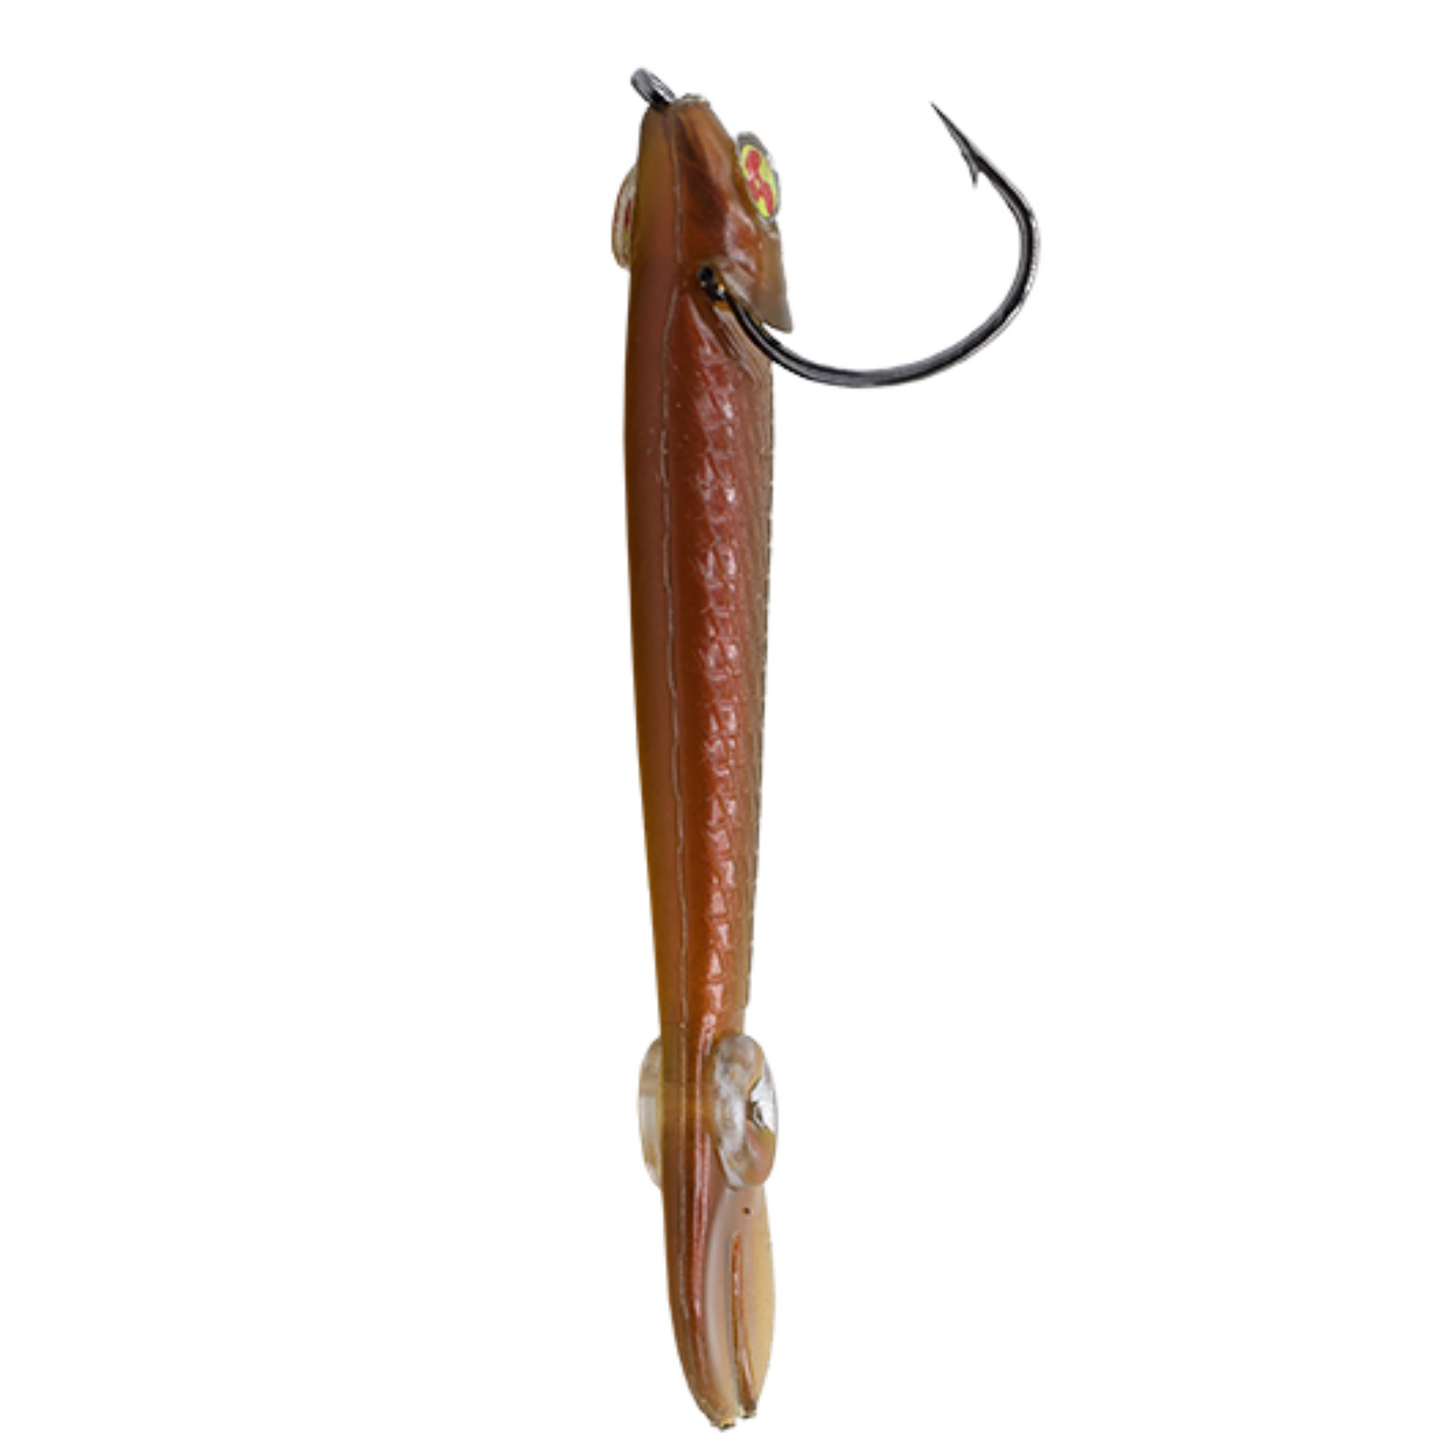 4.25" 5pc. Recoil Baits - Bad Penny